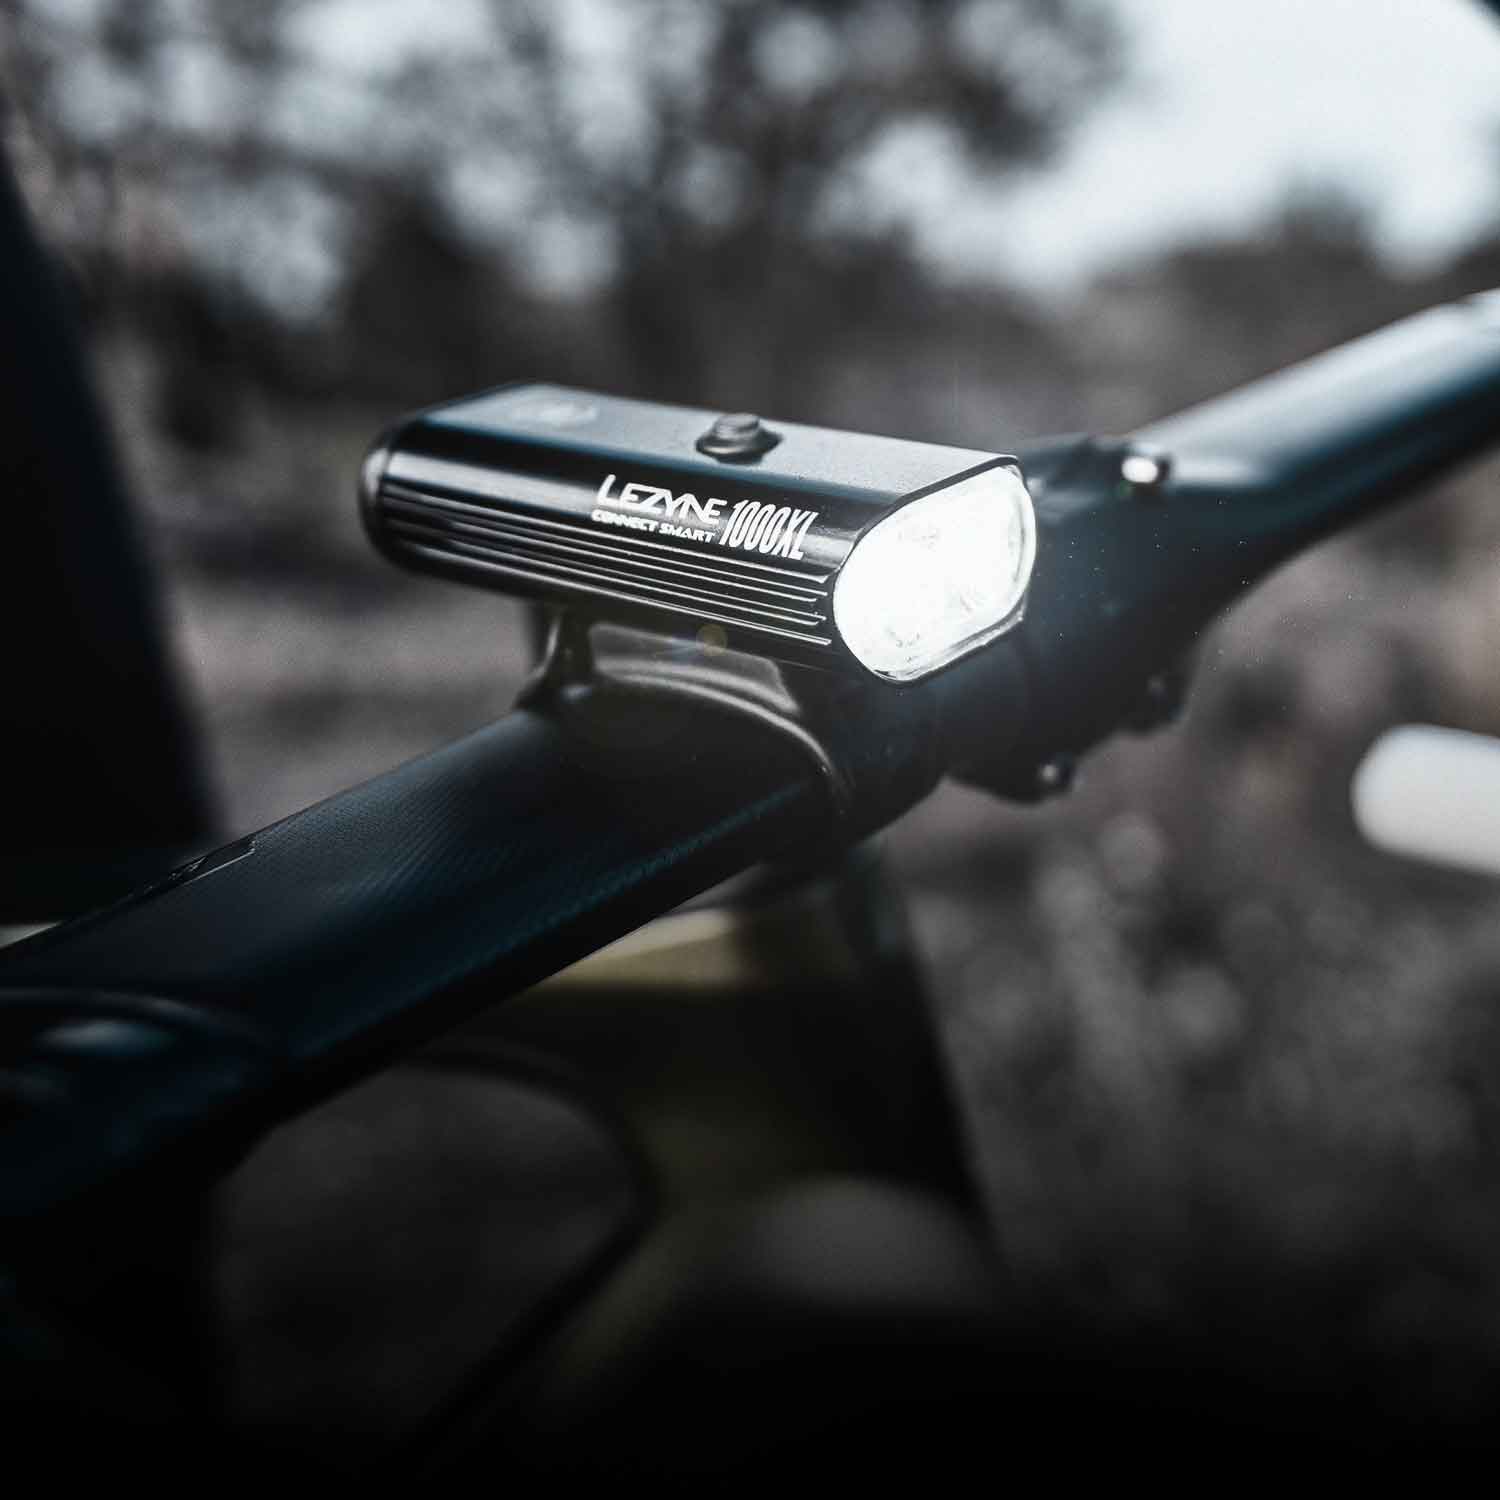 A bright front light mounted on bicycle handlebars with the words Lezyne 1000XL Connect Smart printed on the side of the light.